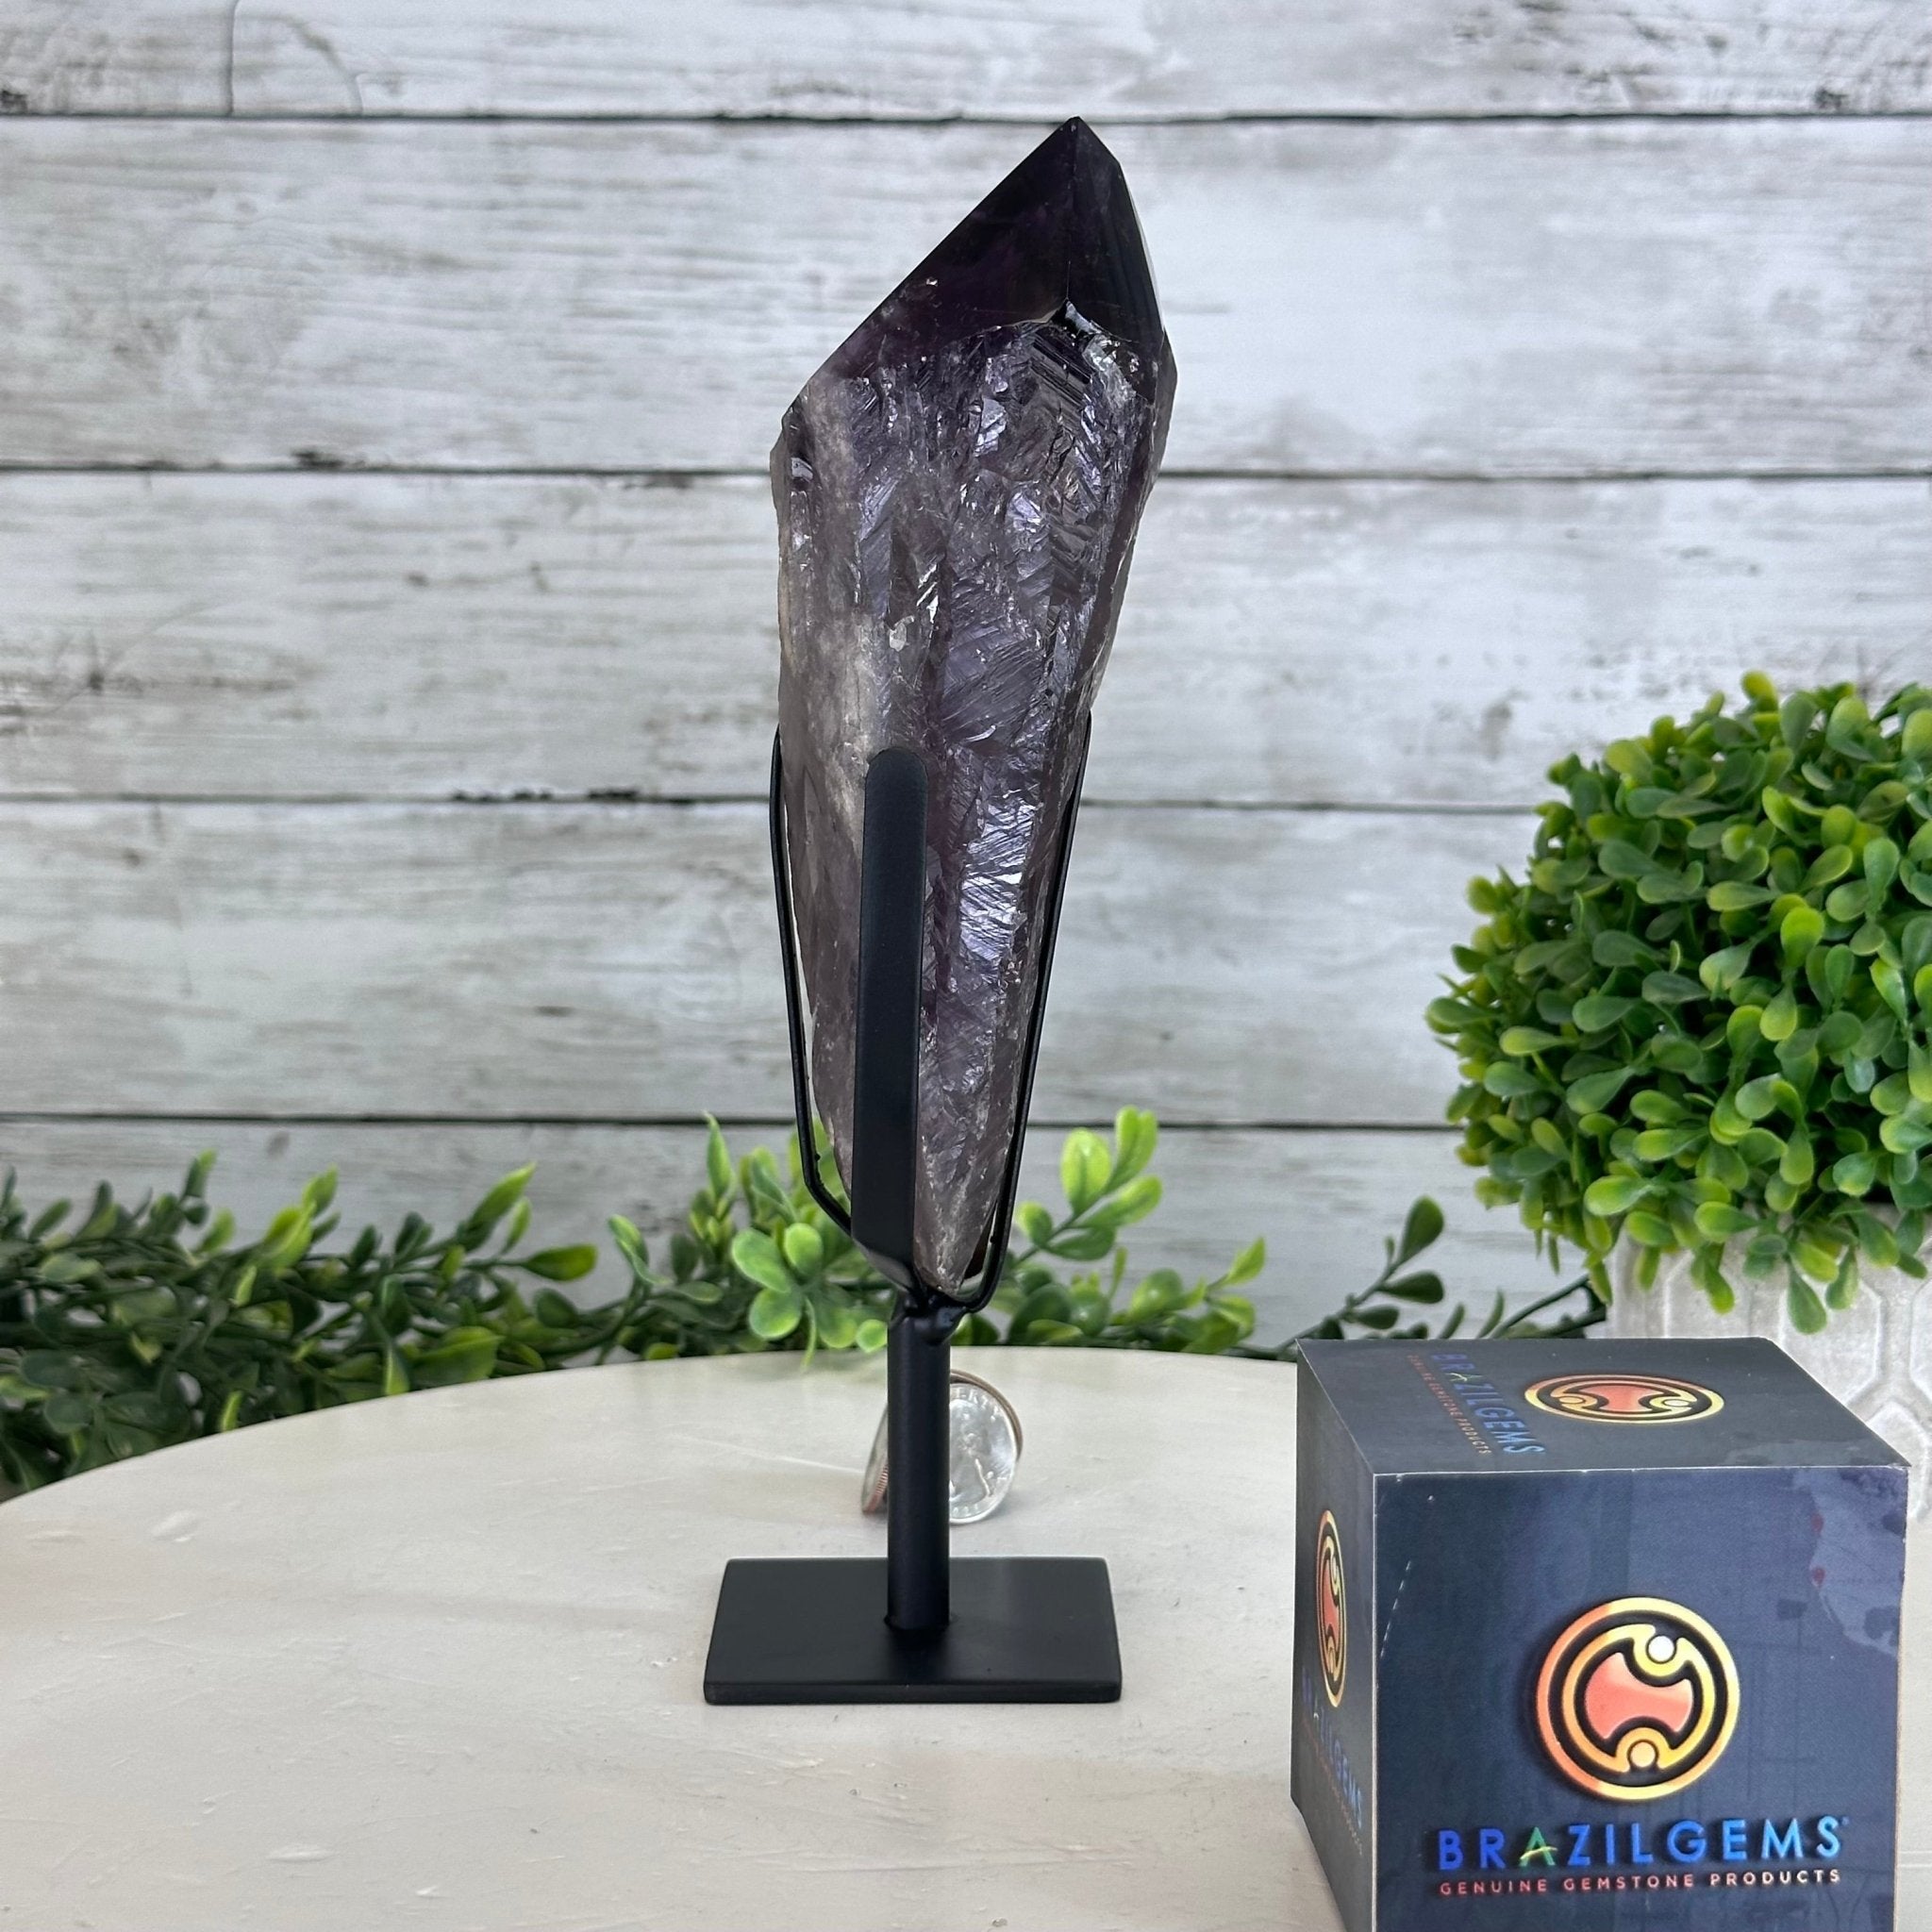 Super Quality Amethyst Wand on a Metal Stand, 1.9 lbs & 9.2" Tall #3123AM-006 - Brazil GemsBrazil GemsSuper Quality Amethyst Wand on a Metal Stand, 1.9 lbs & 9.2" Tall #3123AM-006Clusters on Fixed Bases3123AM-006